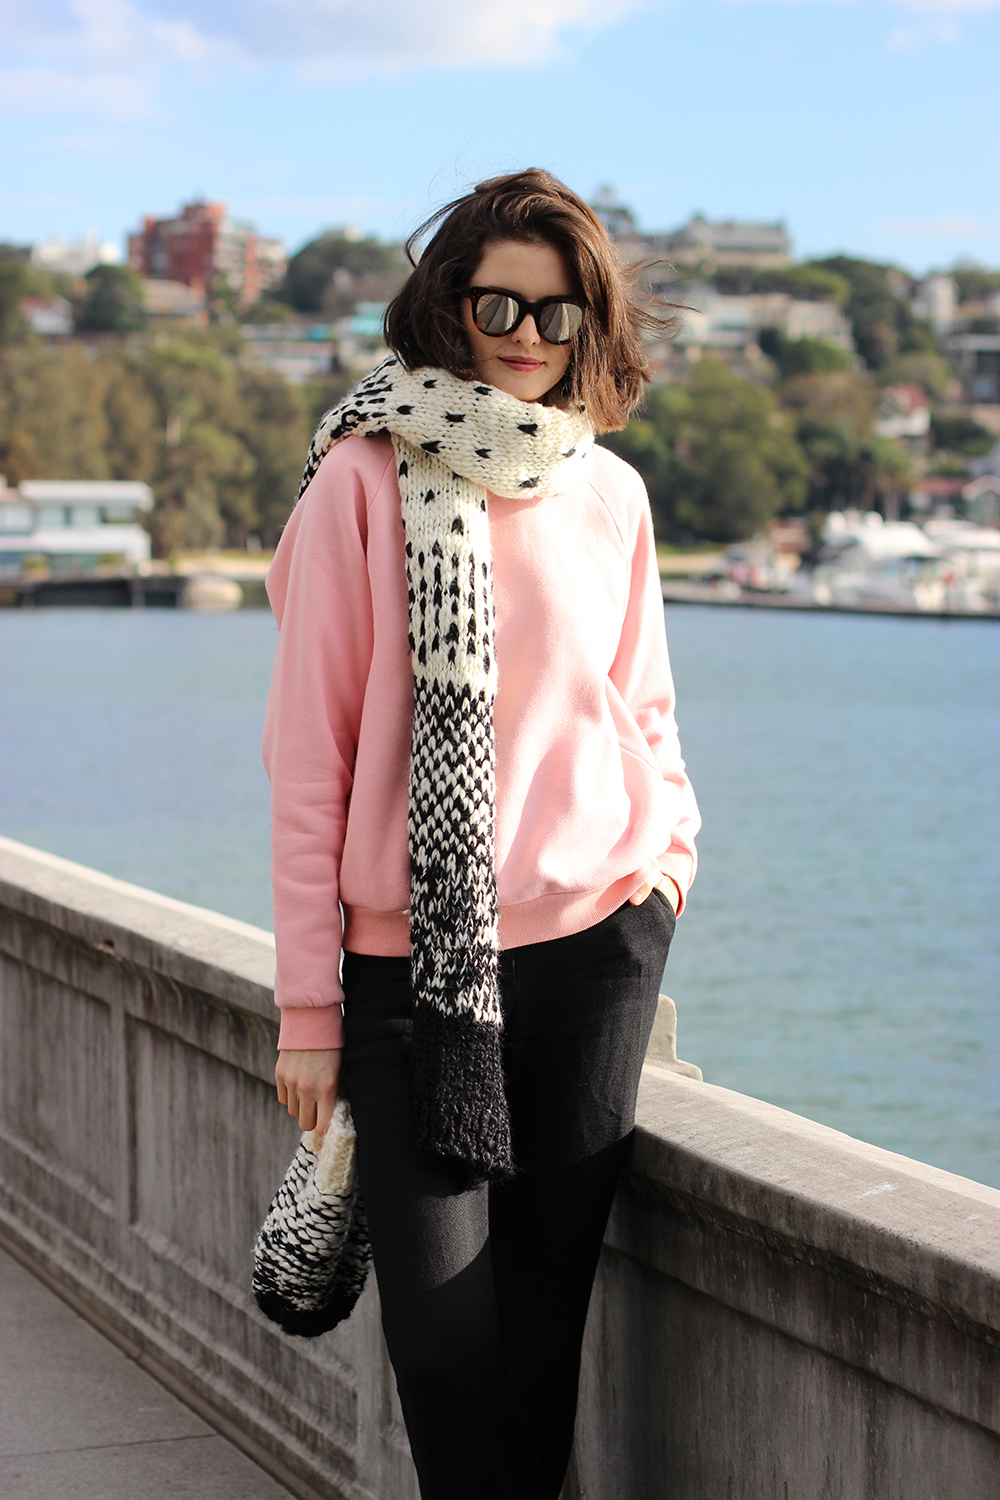 CHLOE C HILL FASHION AND SHOPPING BLOG | Morrison Clothing knitted beanie and scarf, Vale Denim pink fluffy sweater and Spektre silver sunglasses from The Standard store in Surry Hills